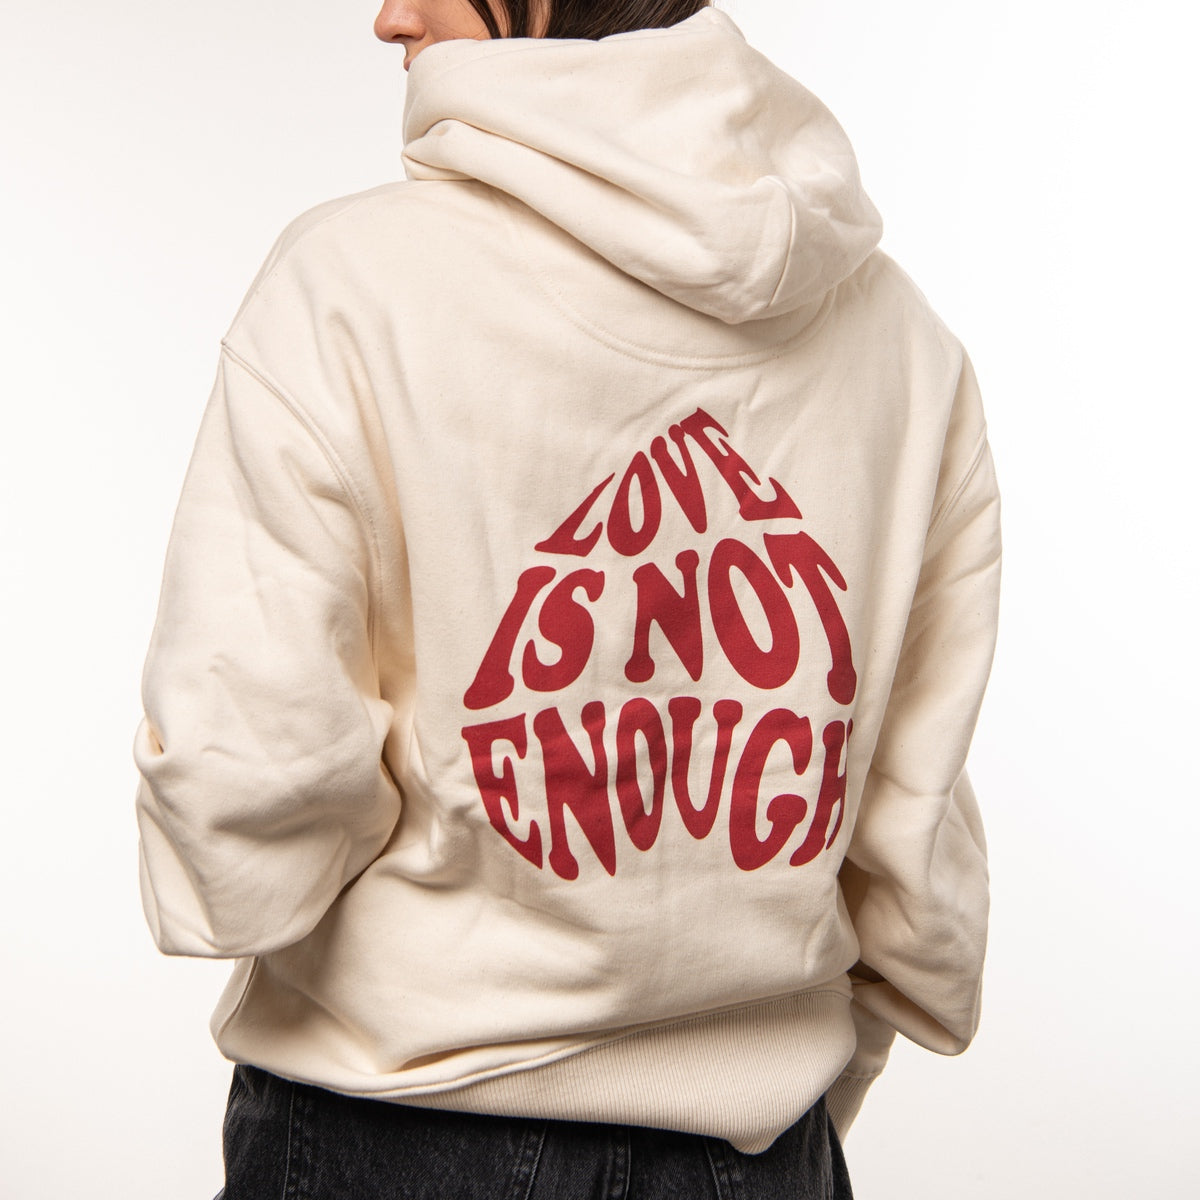 A-MORE Love Is Not Enough - Sudadera